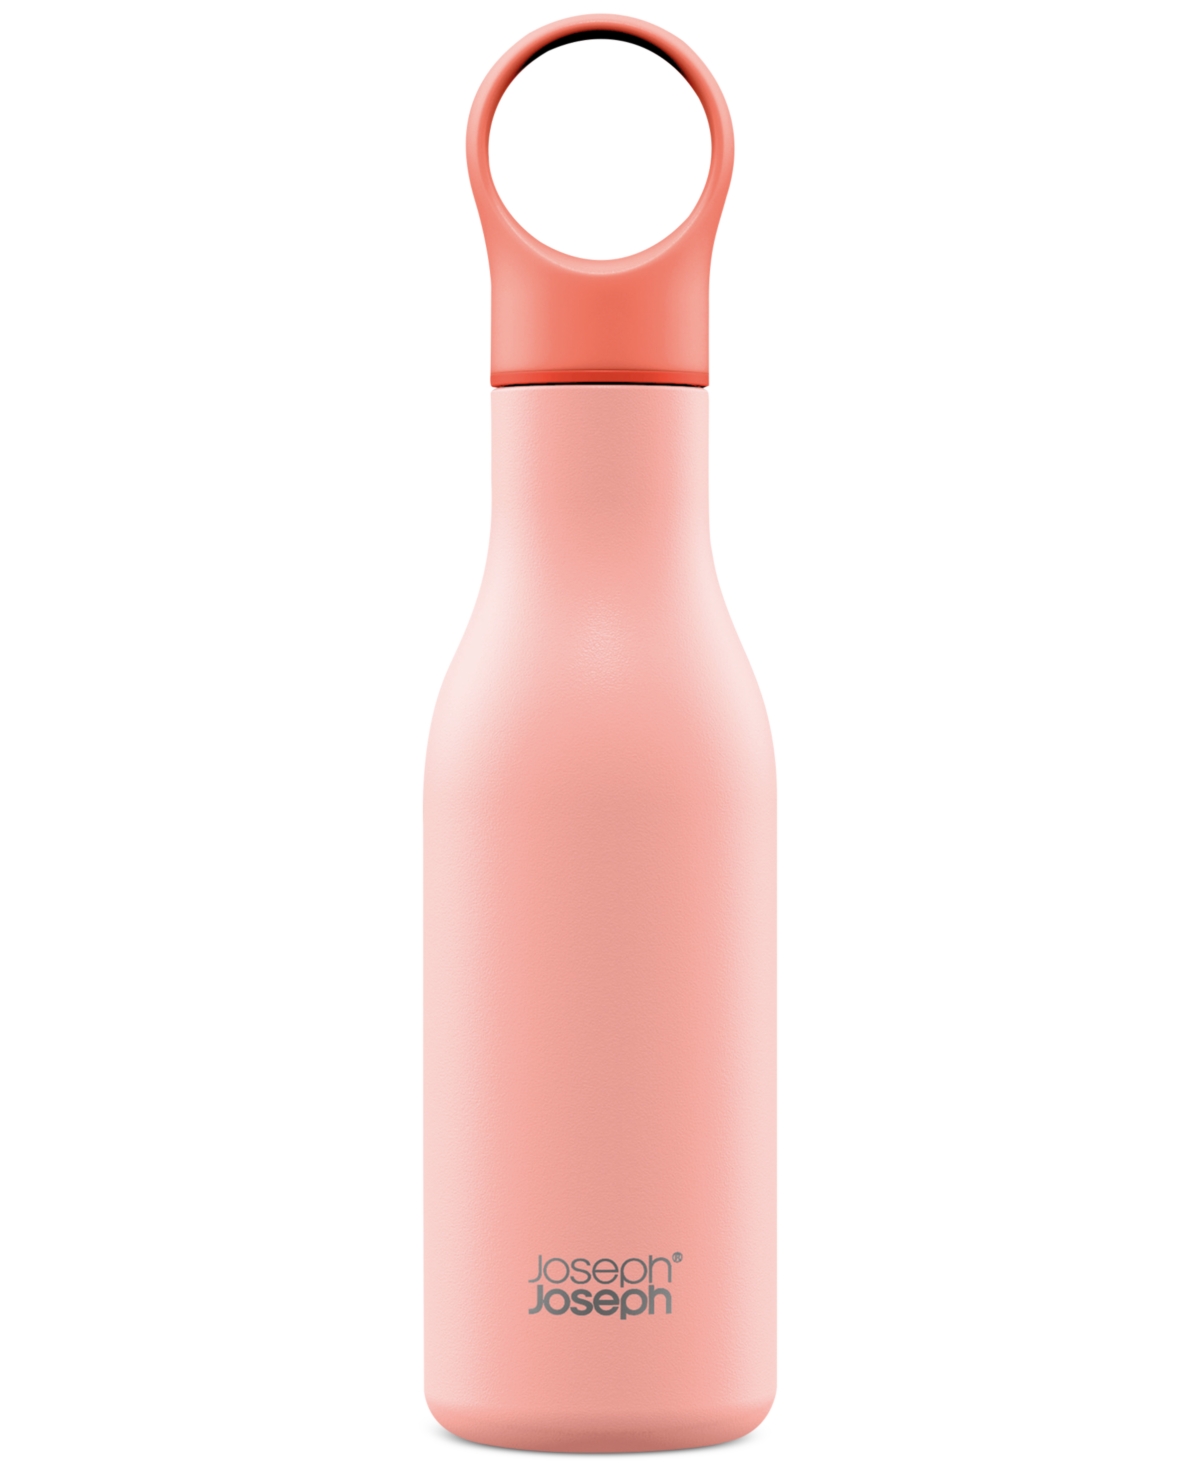 Joseph Joseph Loop Insulated Water Bottle In Coral